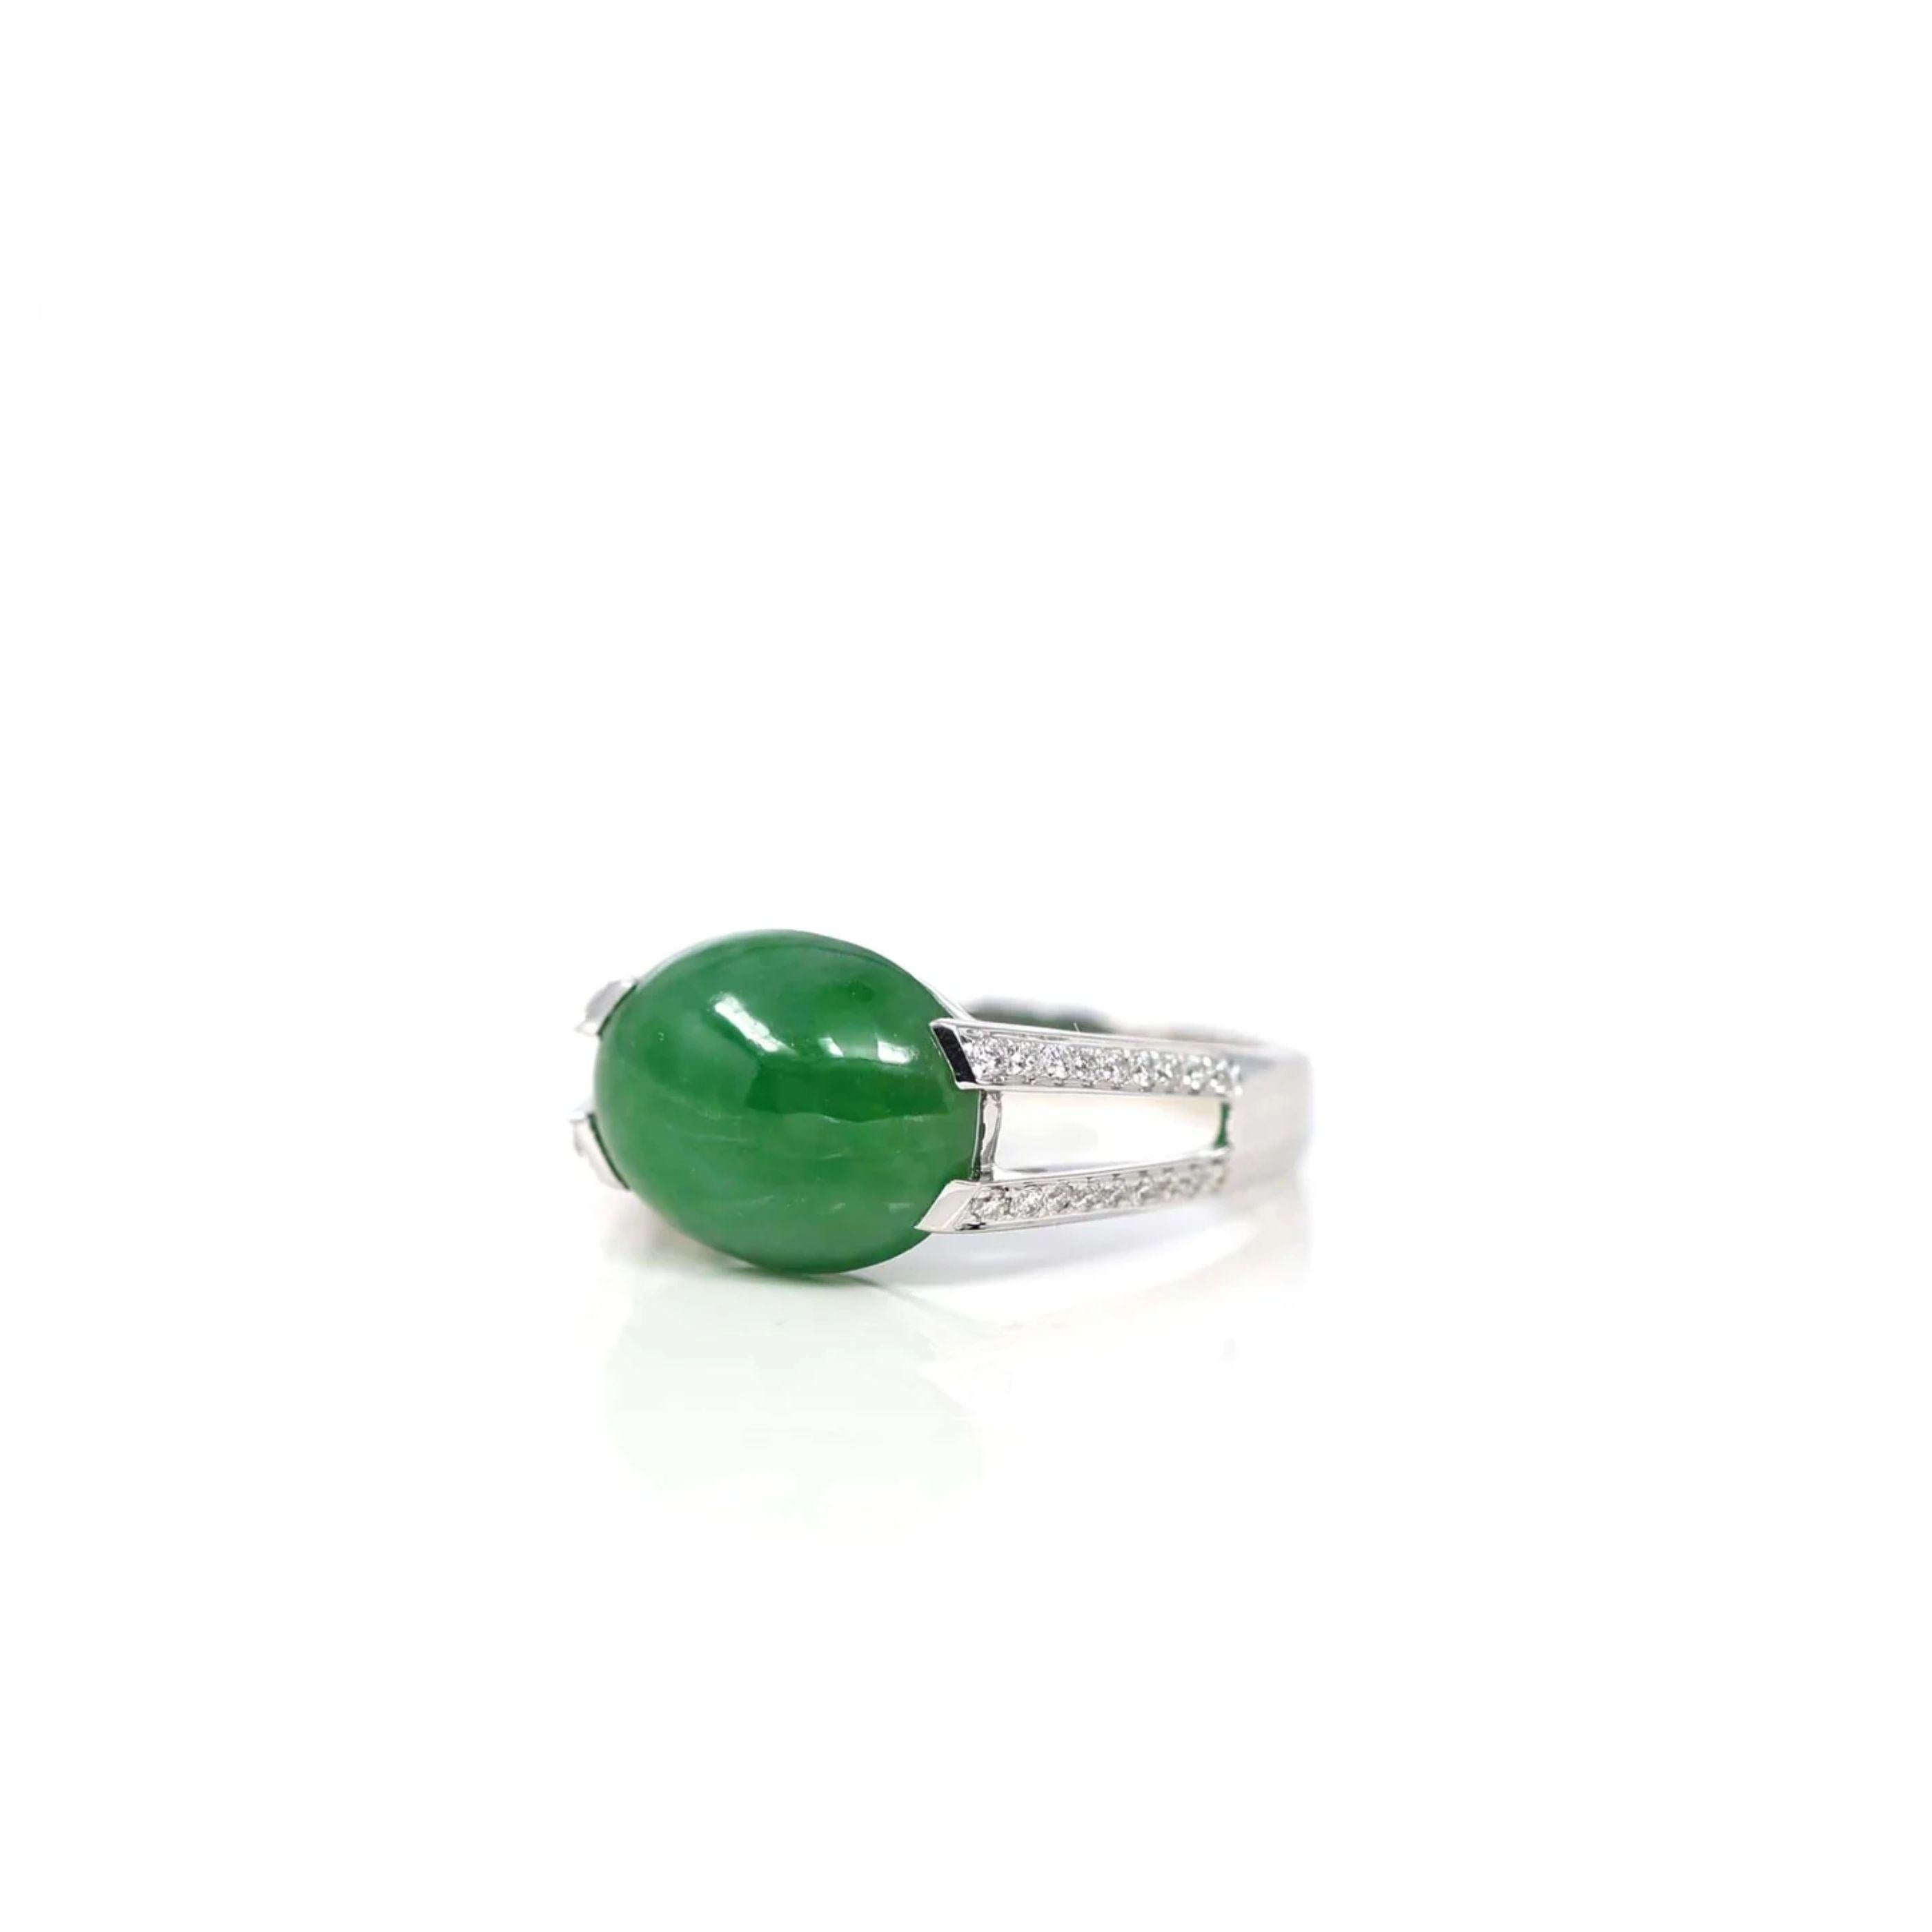 * ORIGINAL DESIGN --- Inspired by the natural beauty of genuine Burmese Imperial Green Jadeite, the rich, beautiful apple green color is found on no other stone. This one of a kind engagement ring combines the natural beauty of the extremely rare